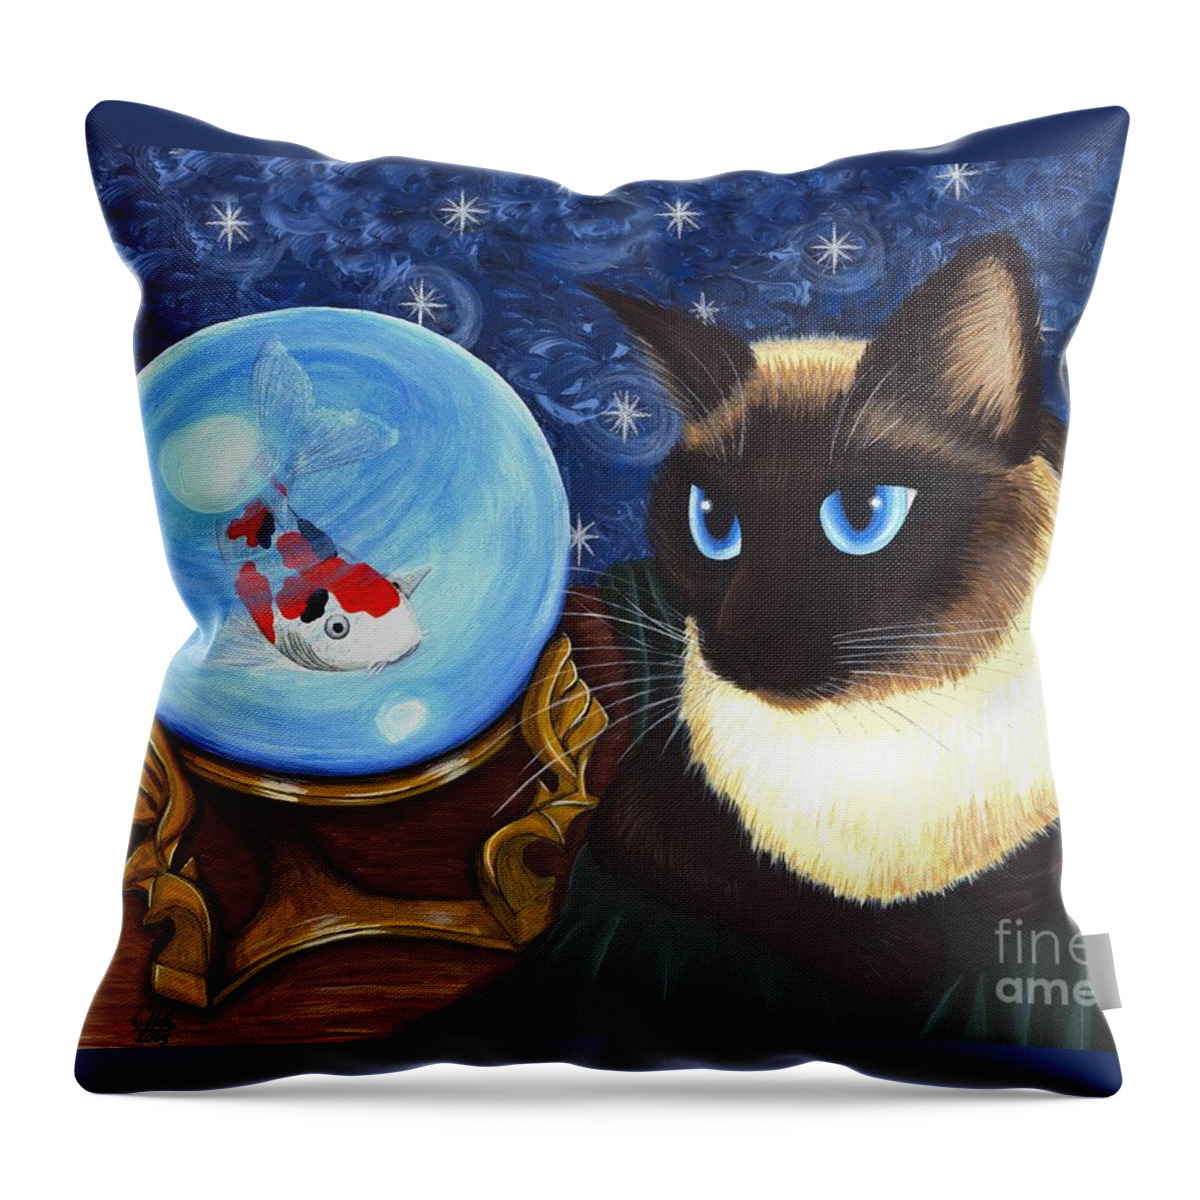 Siamese Cat Throw Pillow featuring the painting Rue Rue's Fortune - Siamese Cat Koi by Carrie Hawks